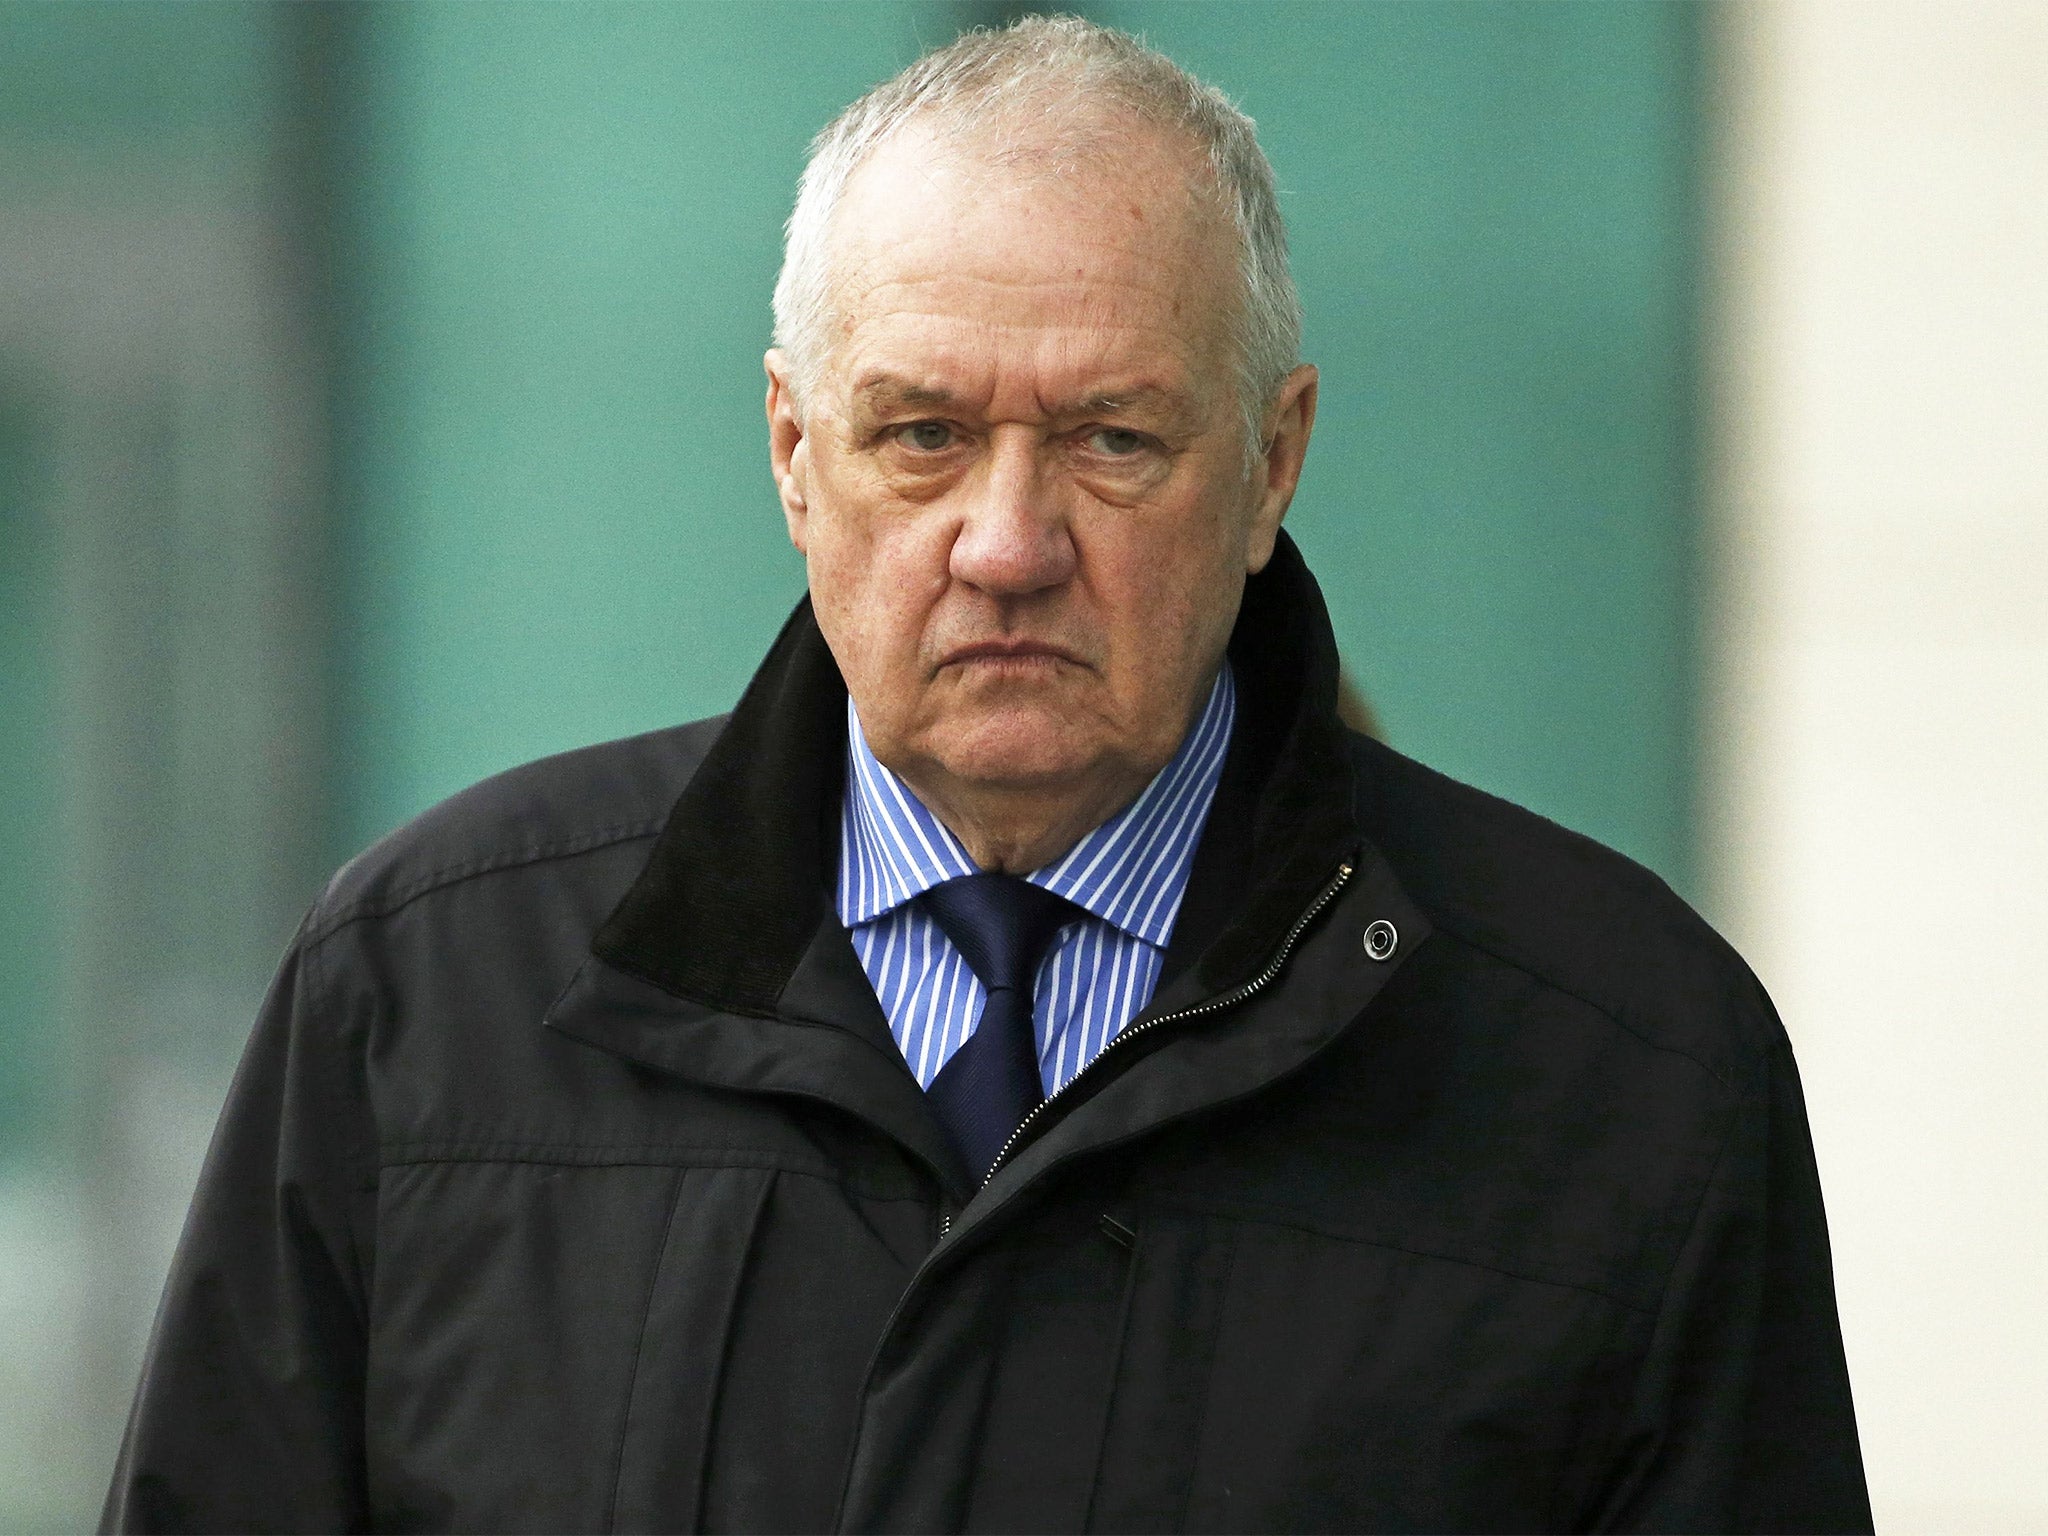 David Duckenfield, former Chief Super-intendent of South Yorkshire Police and the Hillsborough match commander